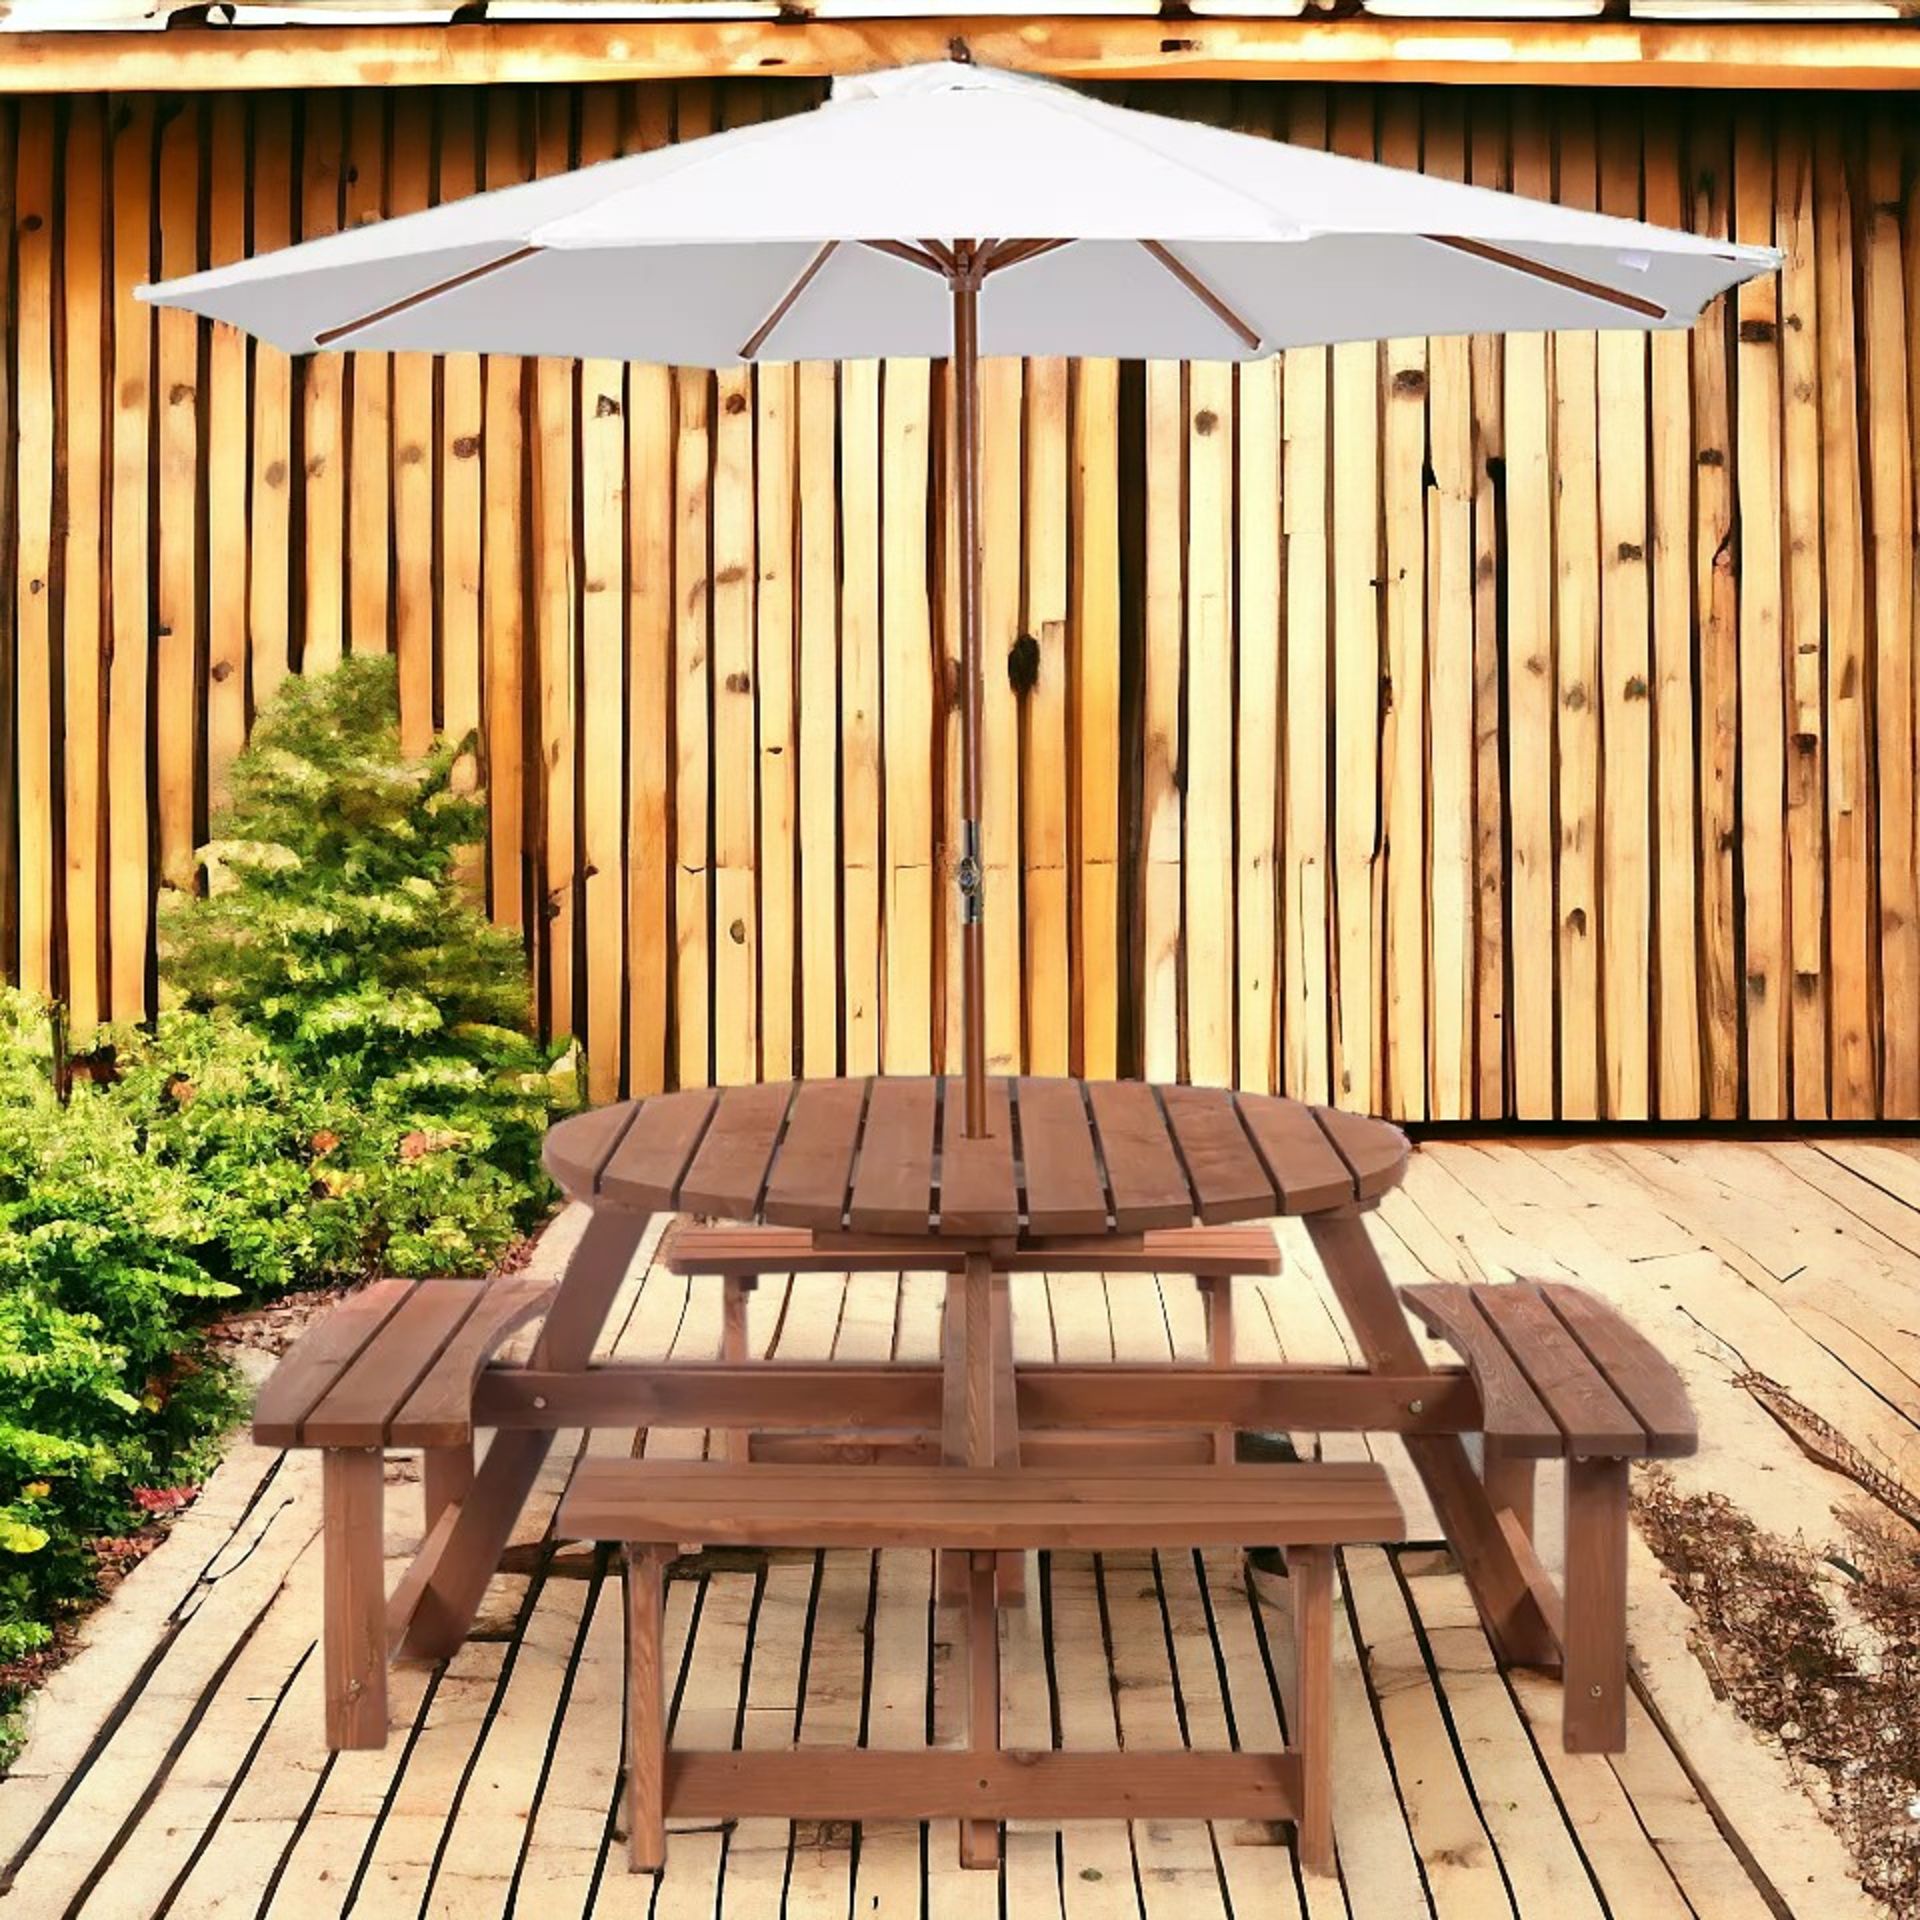 FREE DELIVERY - BRAND NEW 8 SEAT GARDEN OUTDOOR WOODEN ROUND PICNIC TABLE BENCH